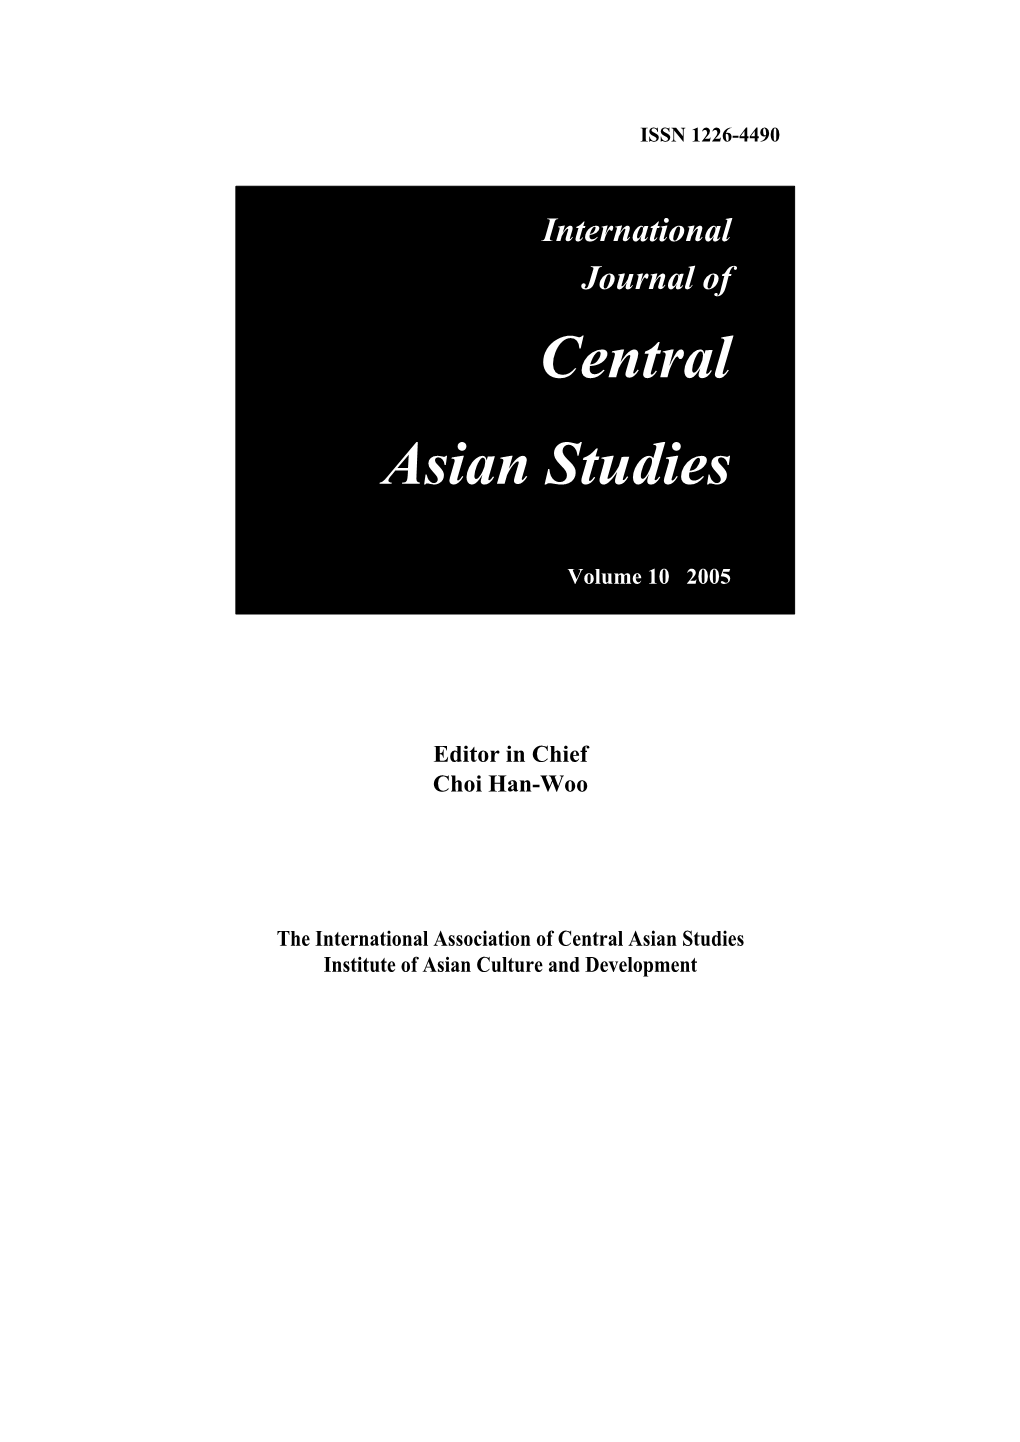 On Studying of Historical and Cultural Processes of the Palaeolithic Epoch in Central Asia